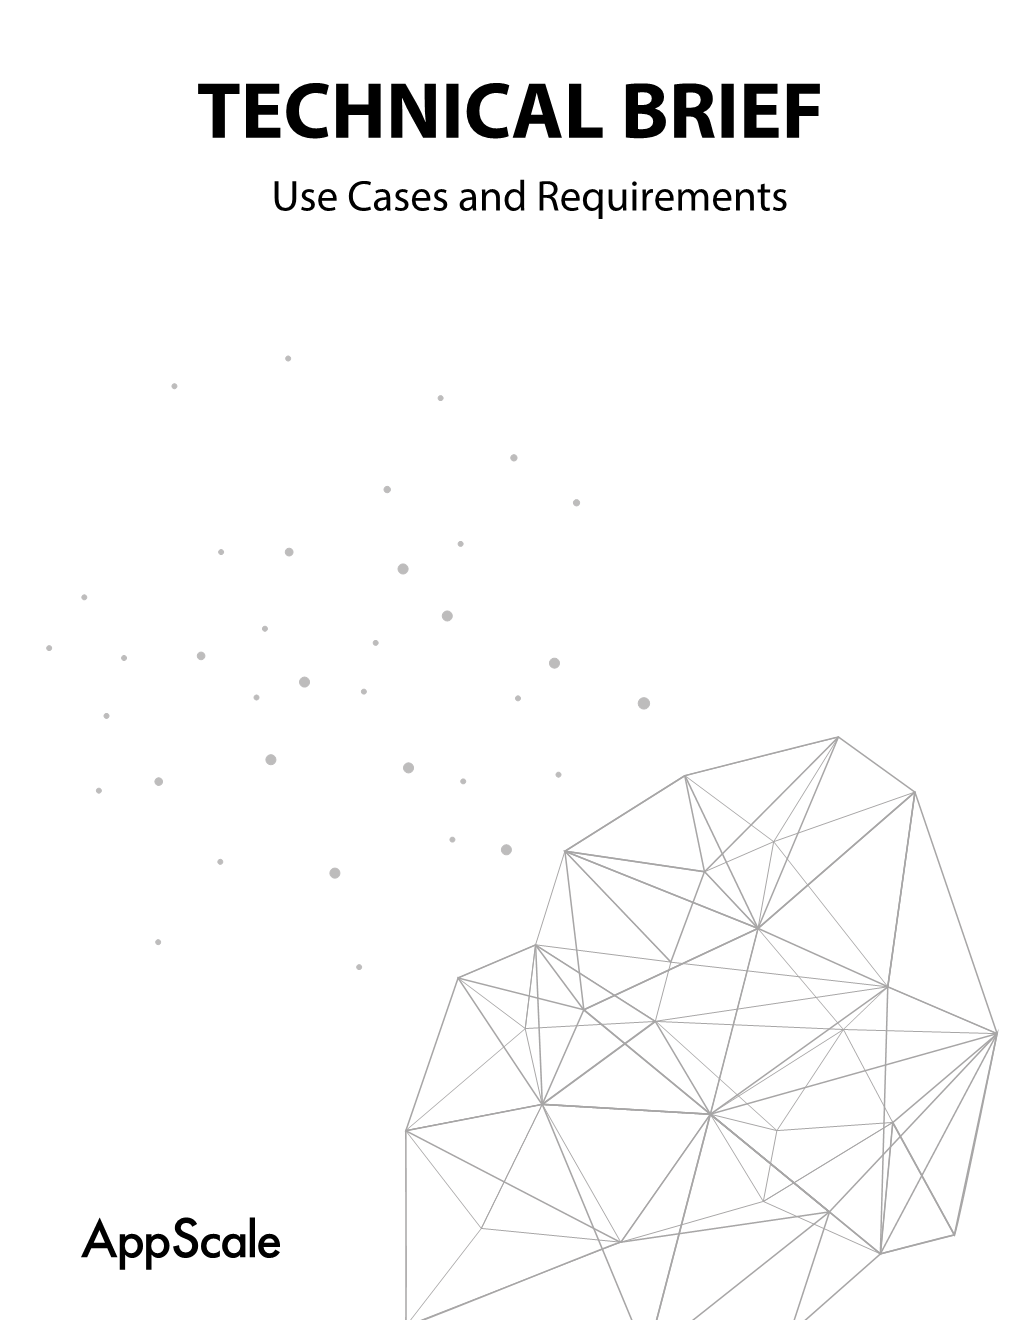 TECHNICAL BRIEF Use Cases and Requirements Introduction